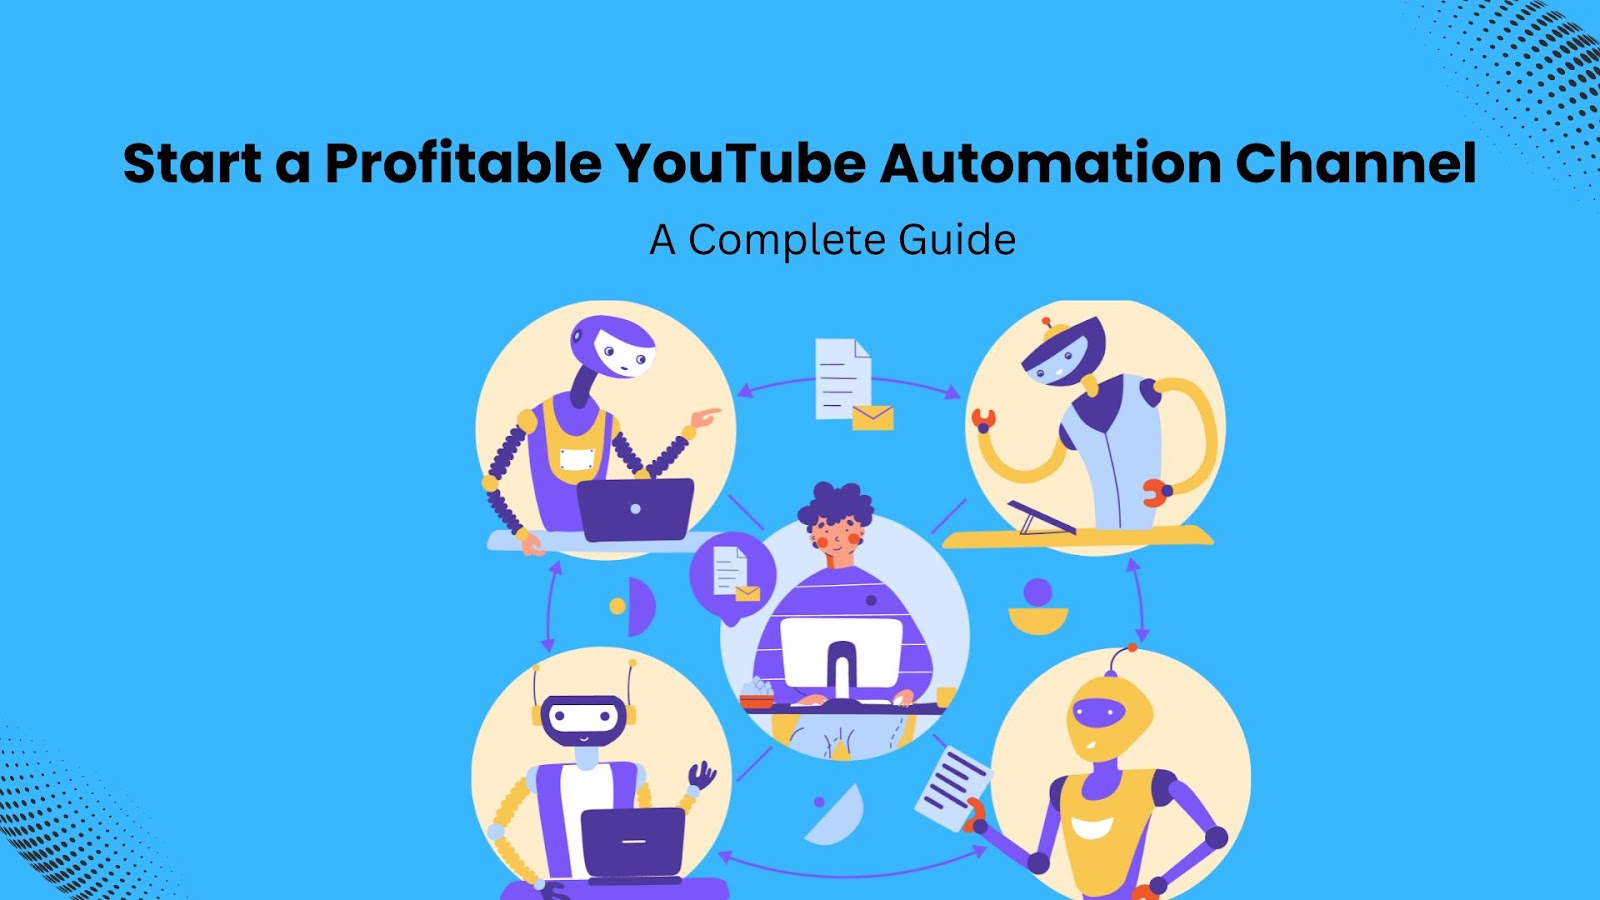 Start a Profitable YouTube Automation Channel